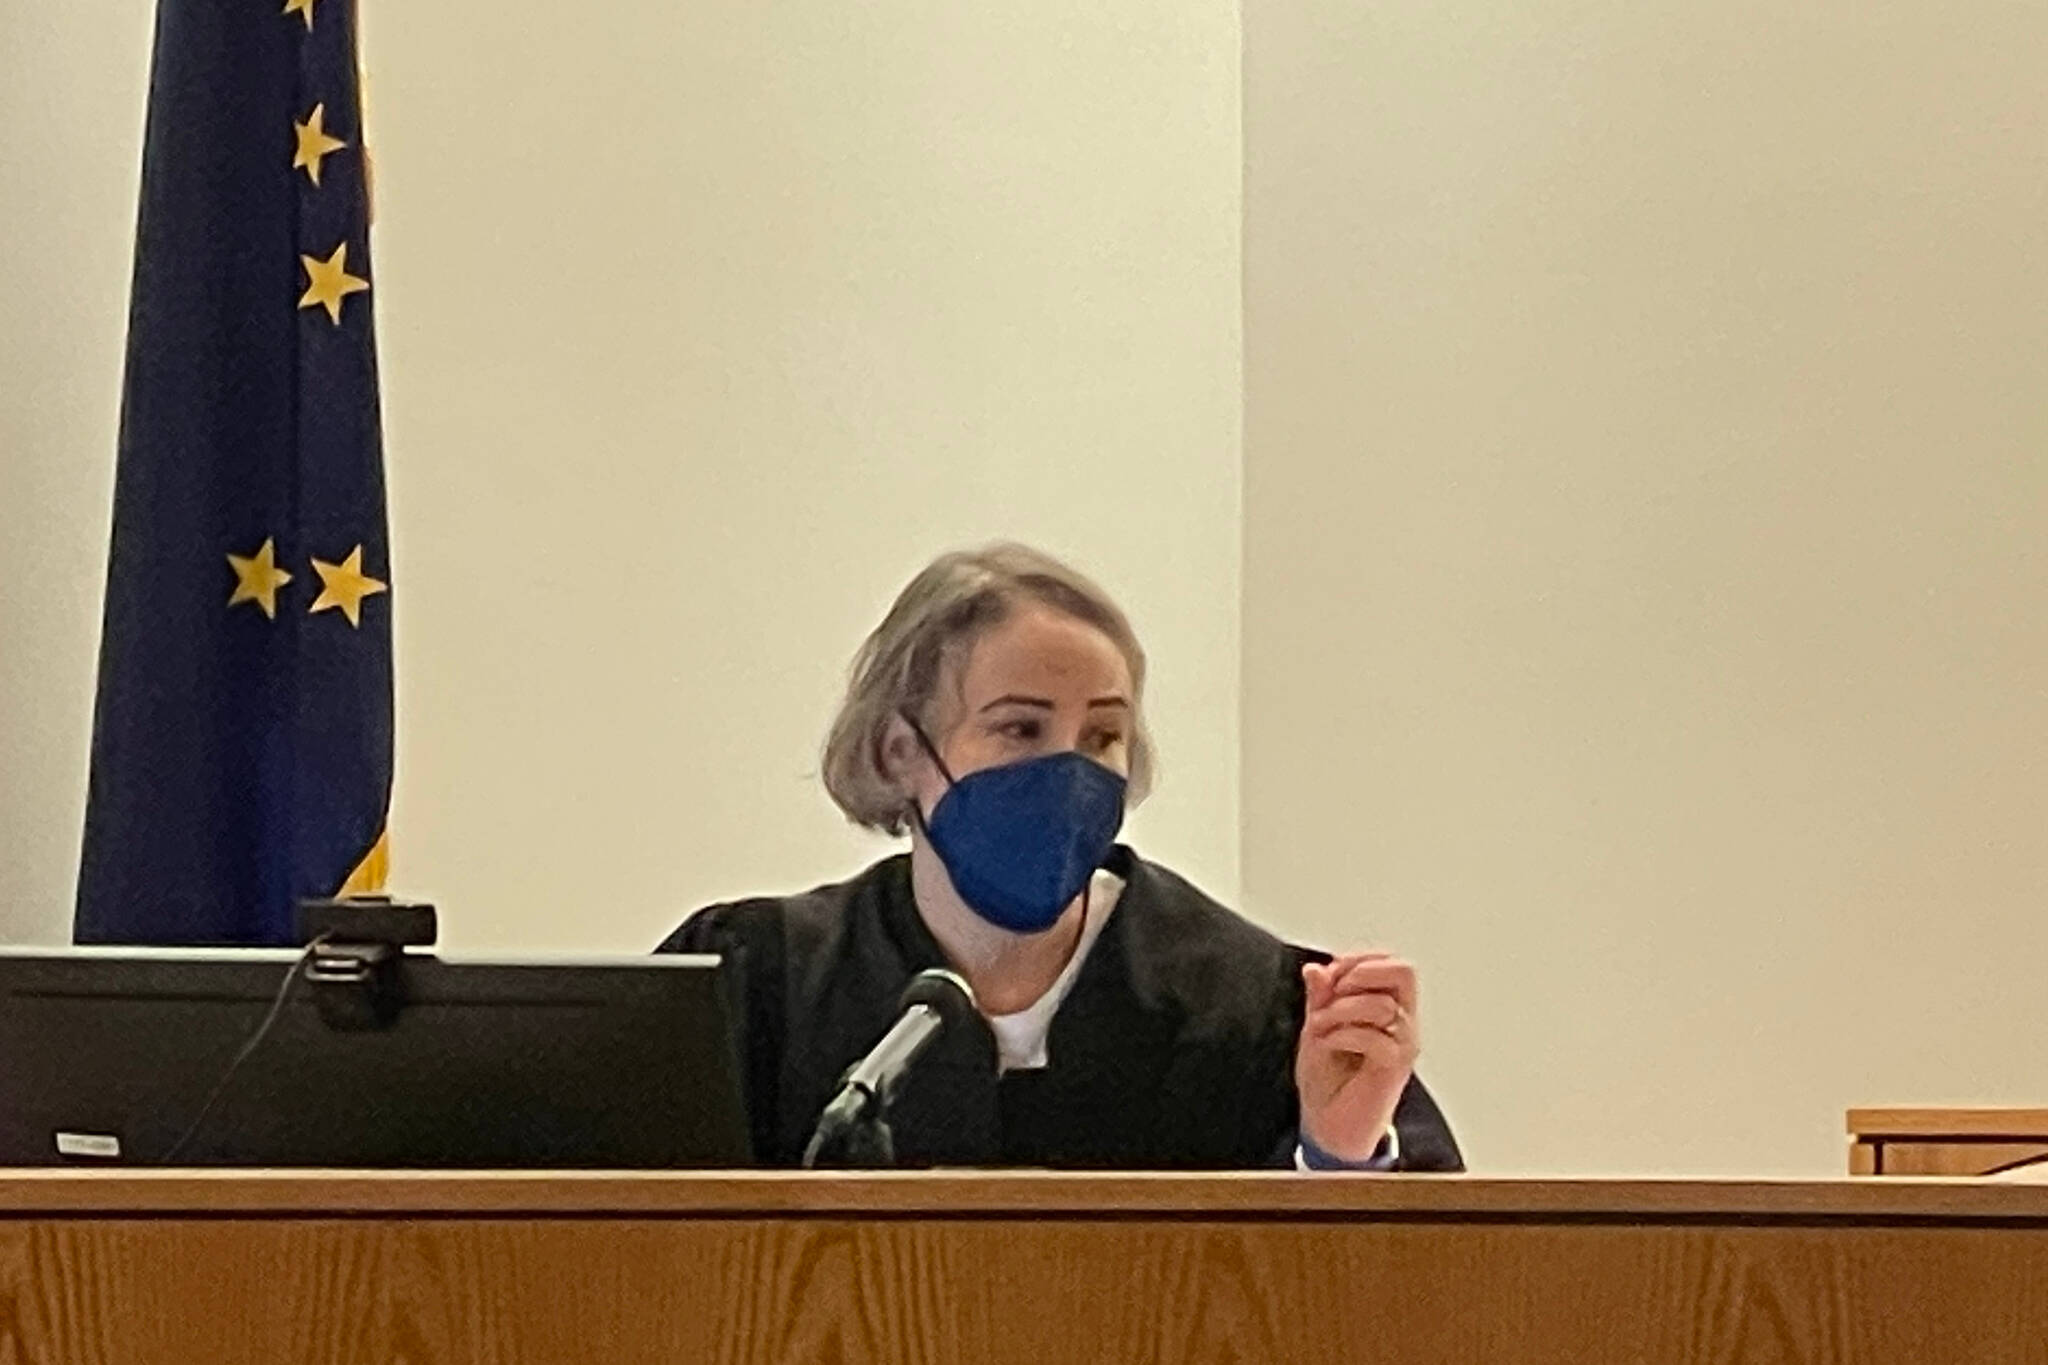 Superior Court Judge Amy Mead delivers an instruction to the jury on Jan. 13, 2021 as she presides over the trial of a man charged with killing another man in Yakutat in 2018. (Michael S. Lockett / Juneau Empire File)